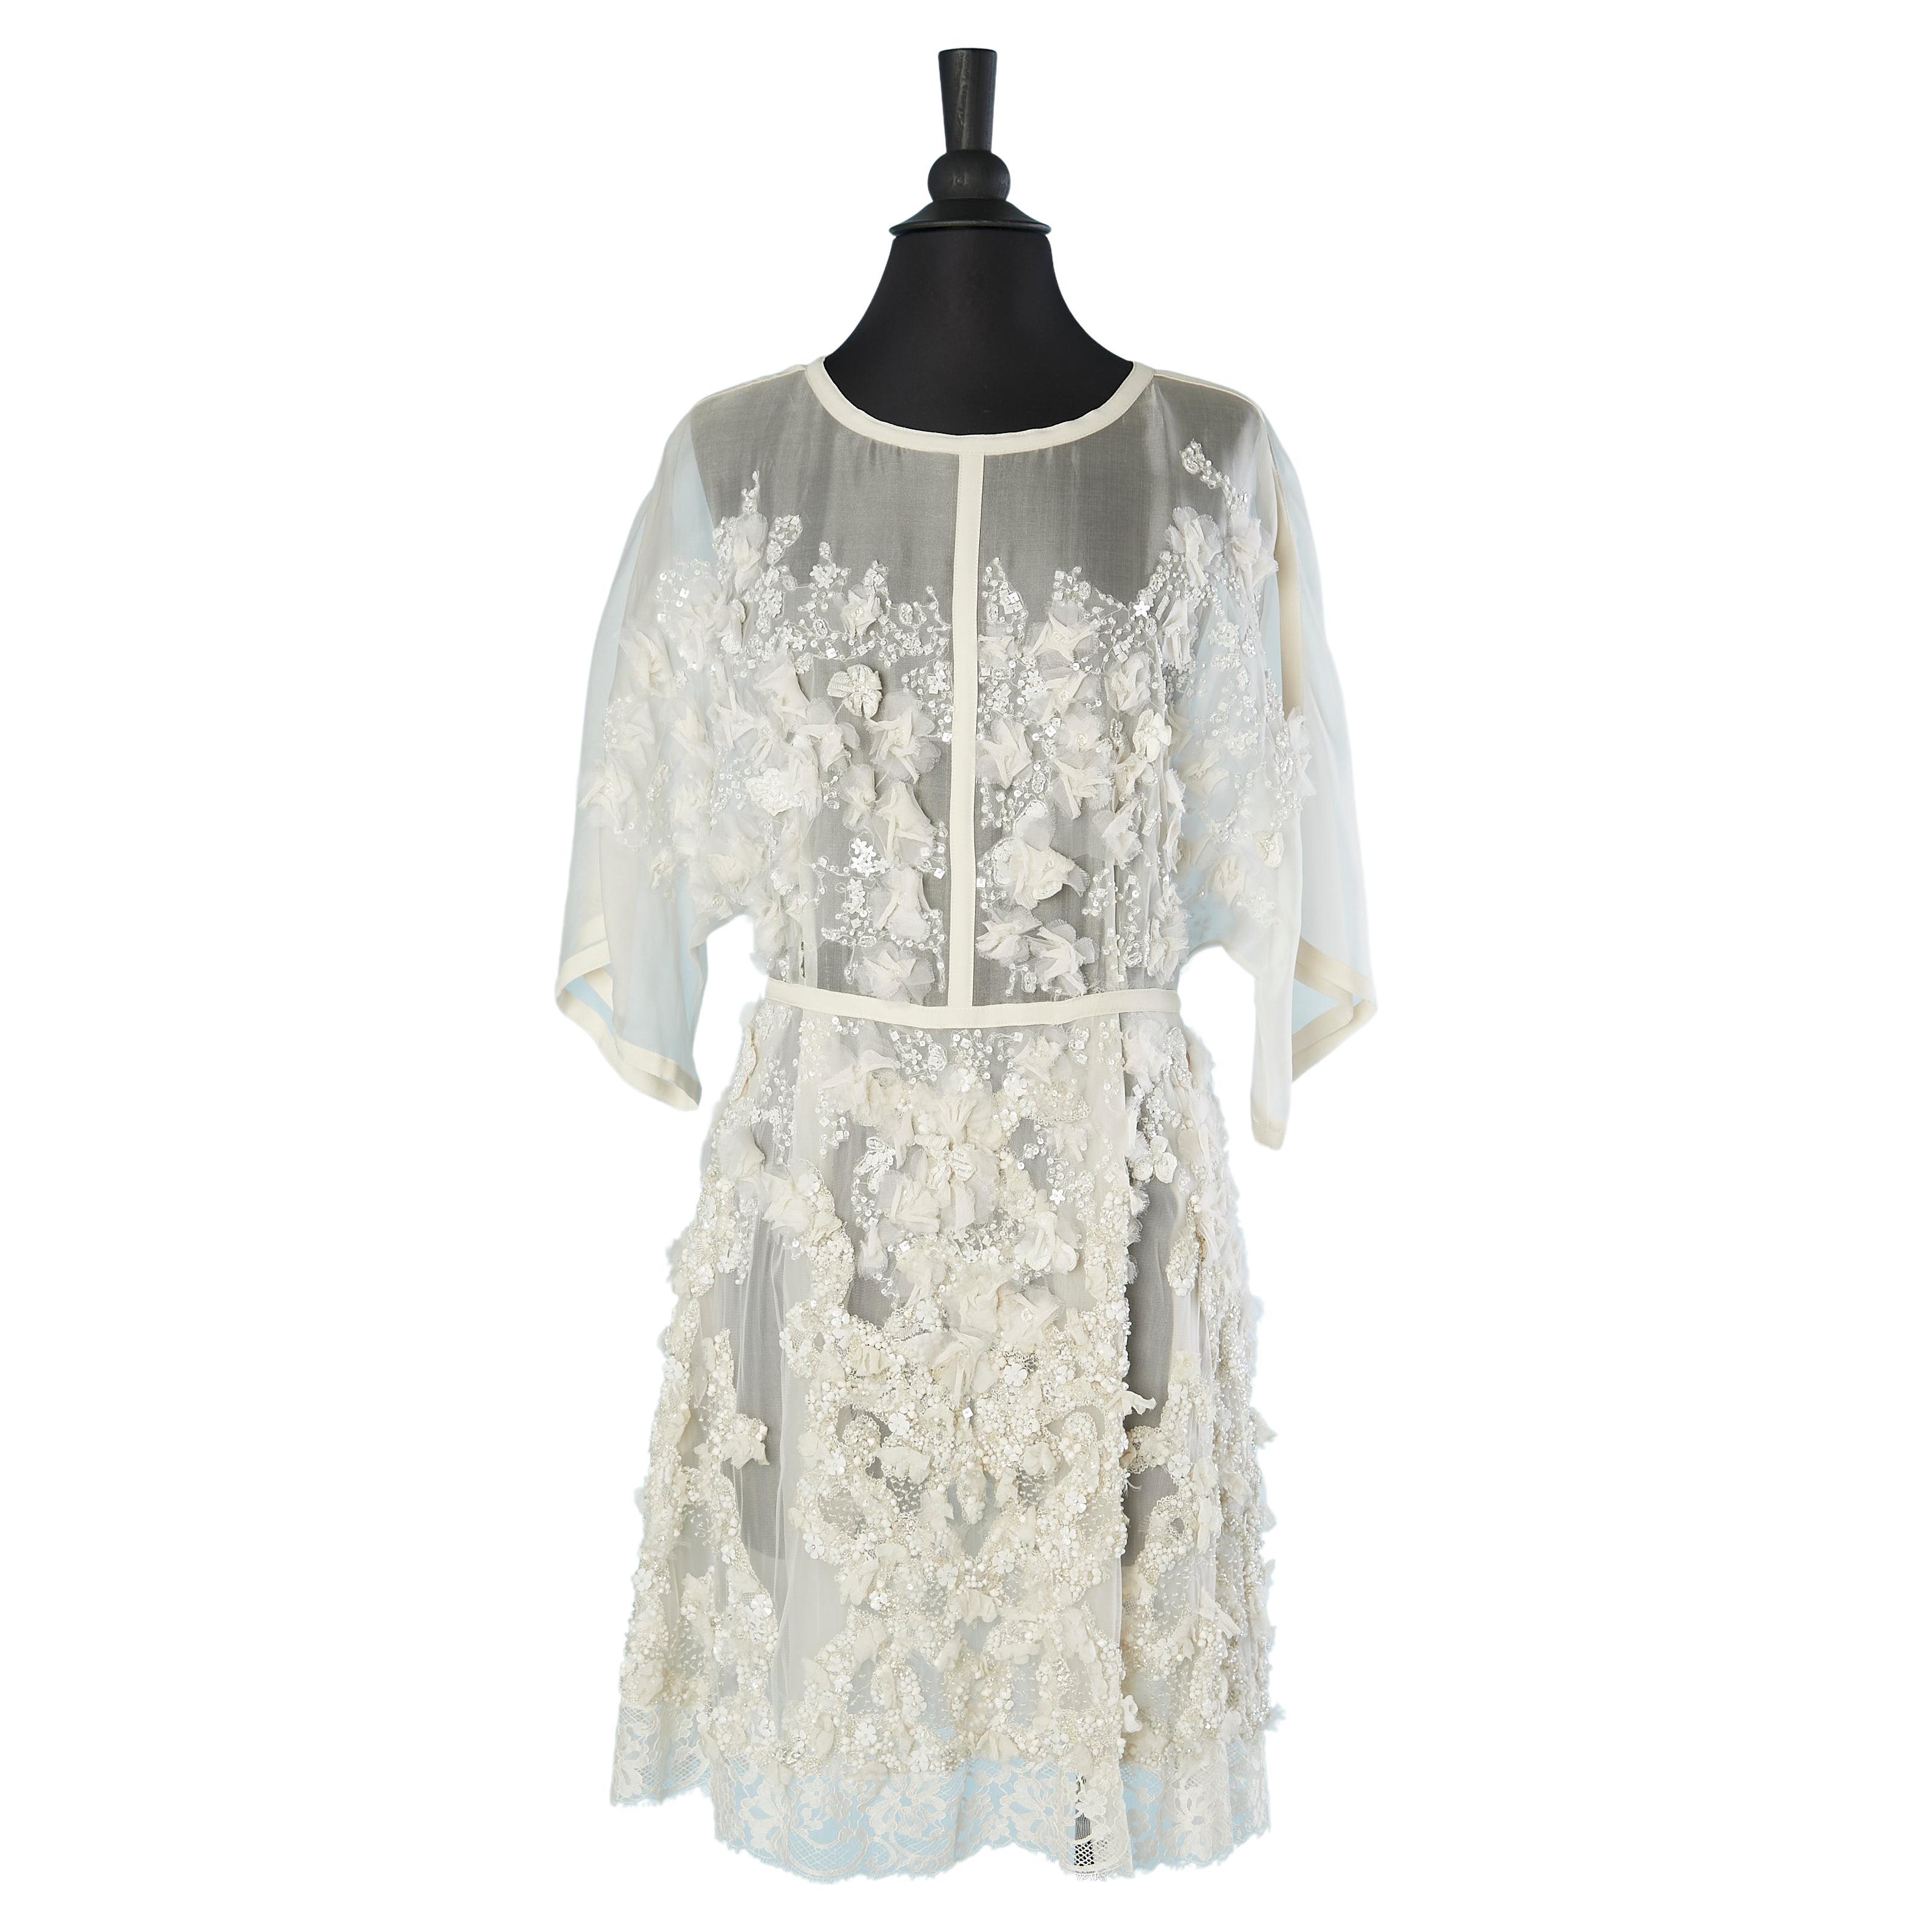 Off-white silk chiffon cocktail dress with white embroideries Elie Saab  For Sale